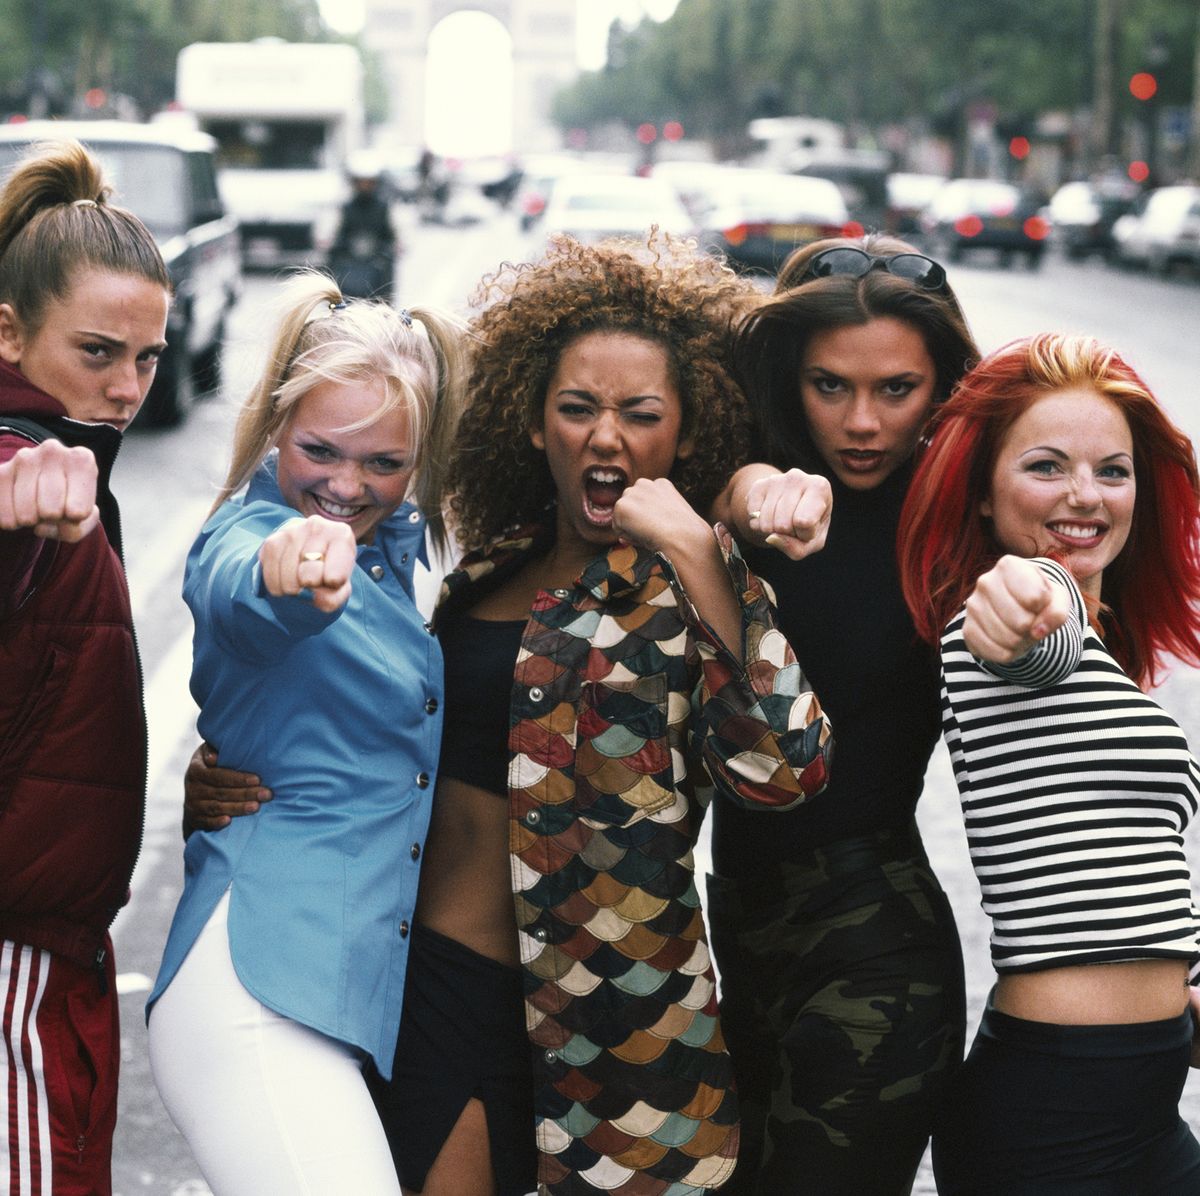 Spice Girls fashion - a look back at their retro style